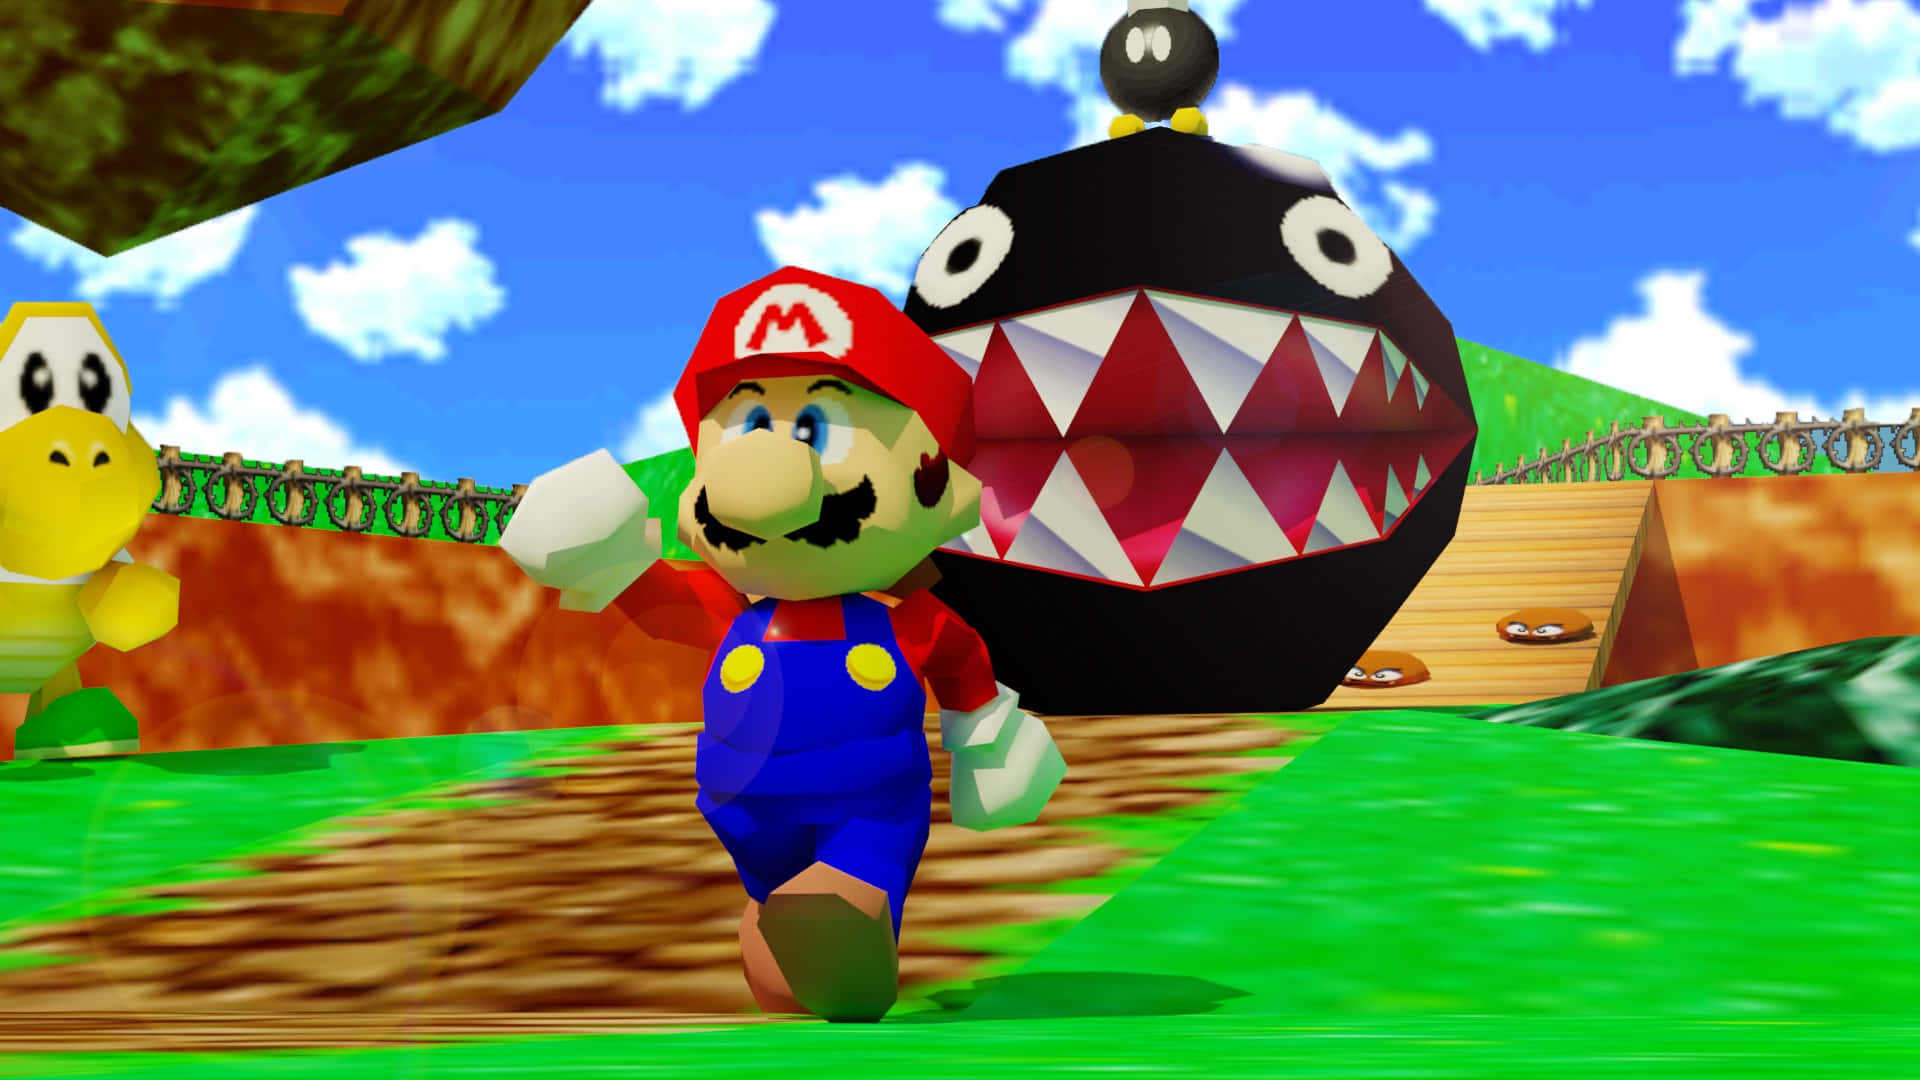 Chain Chomp Character From Super Mario Series Against A Vivid, Fiery Background Wallpaper